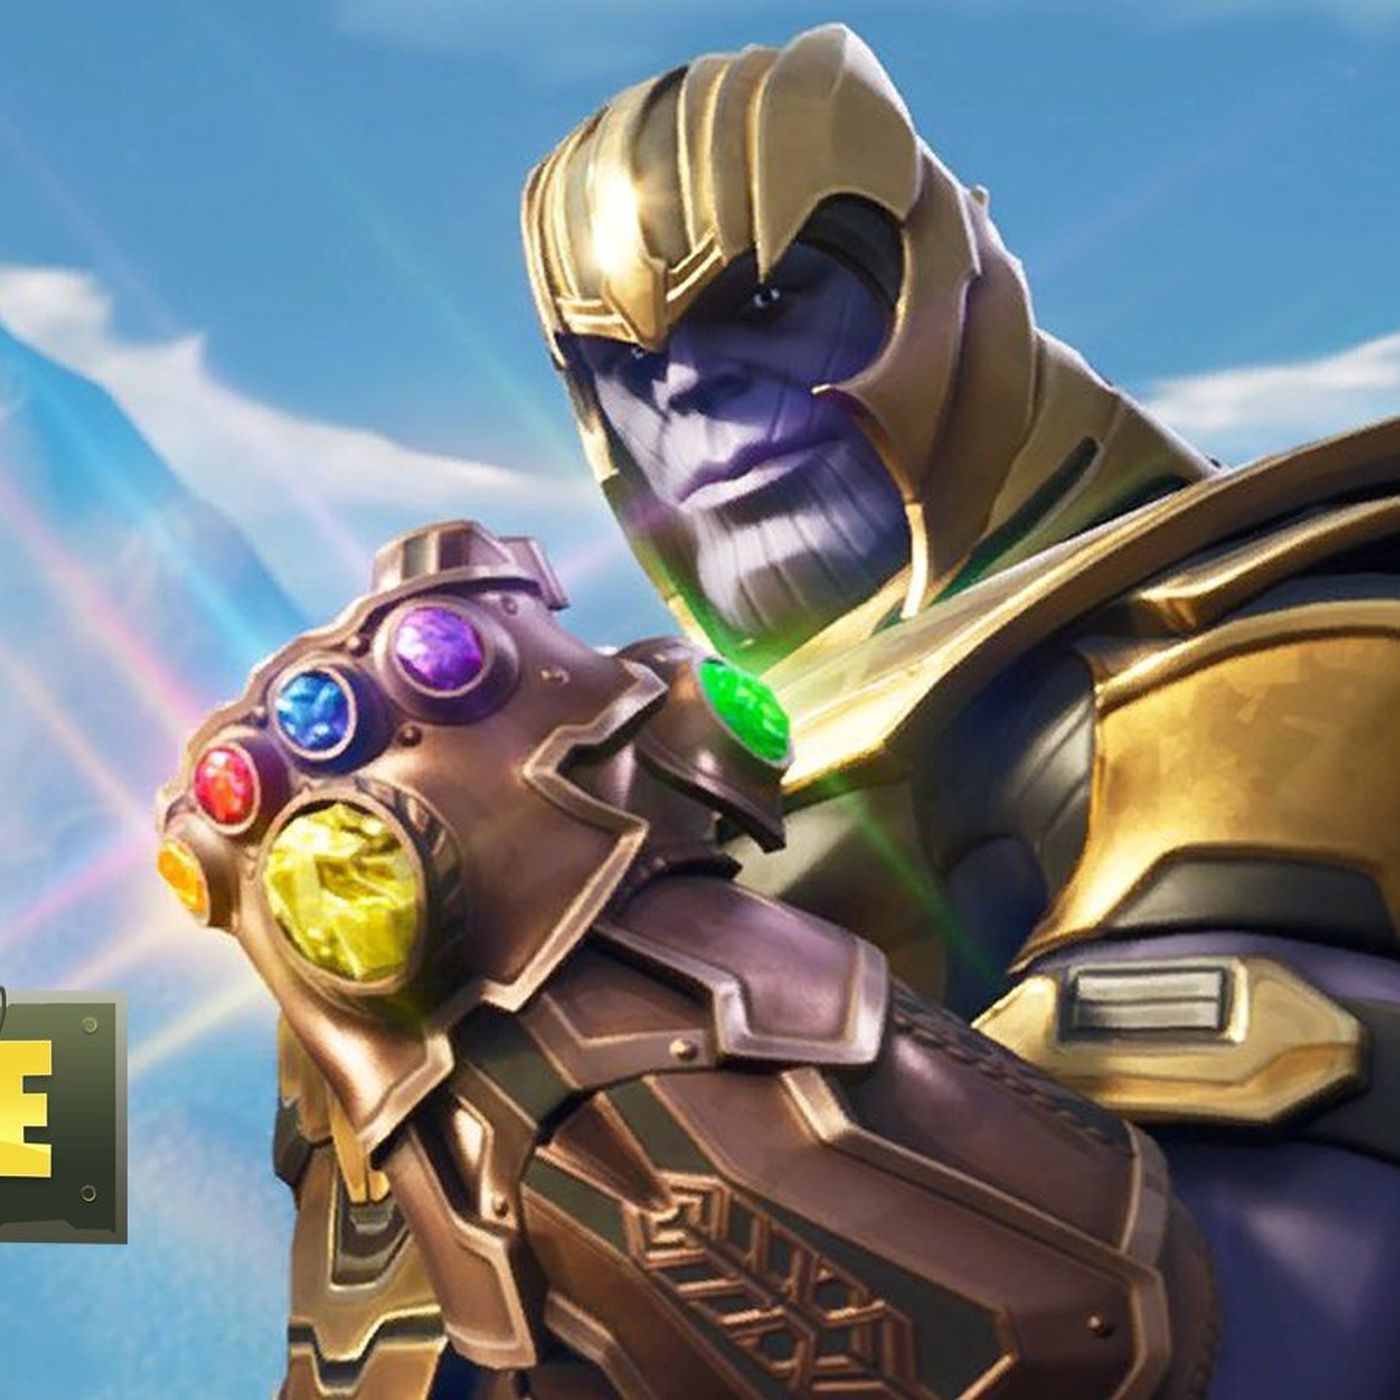 The Universe Shattering Implications Of Fortnite In Avengers